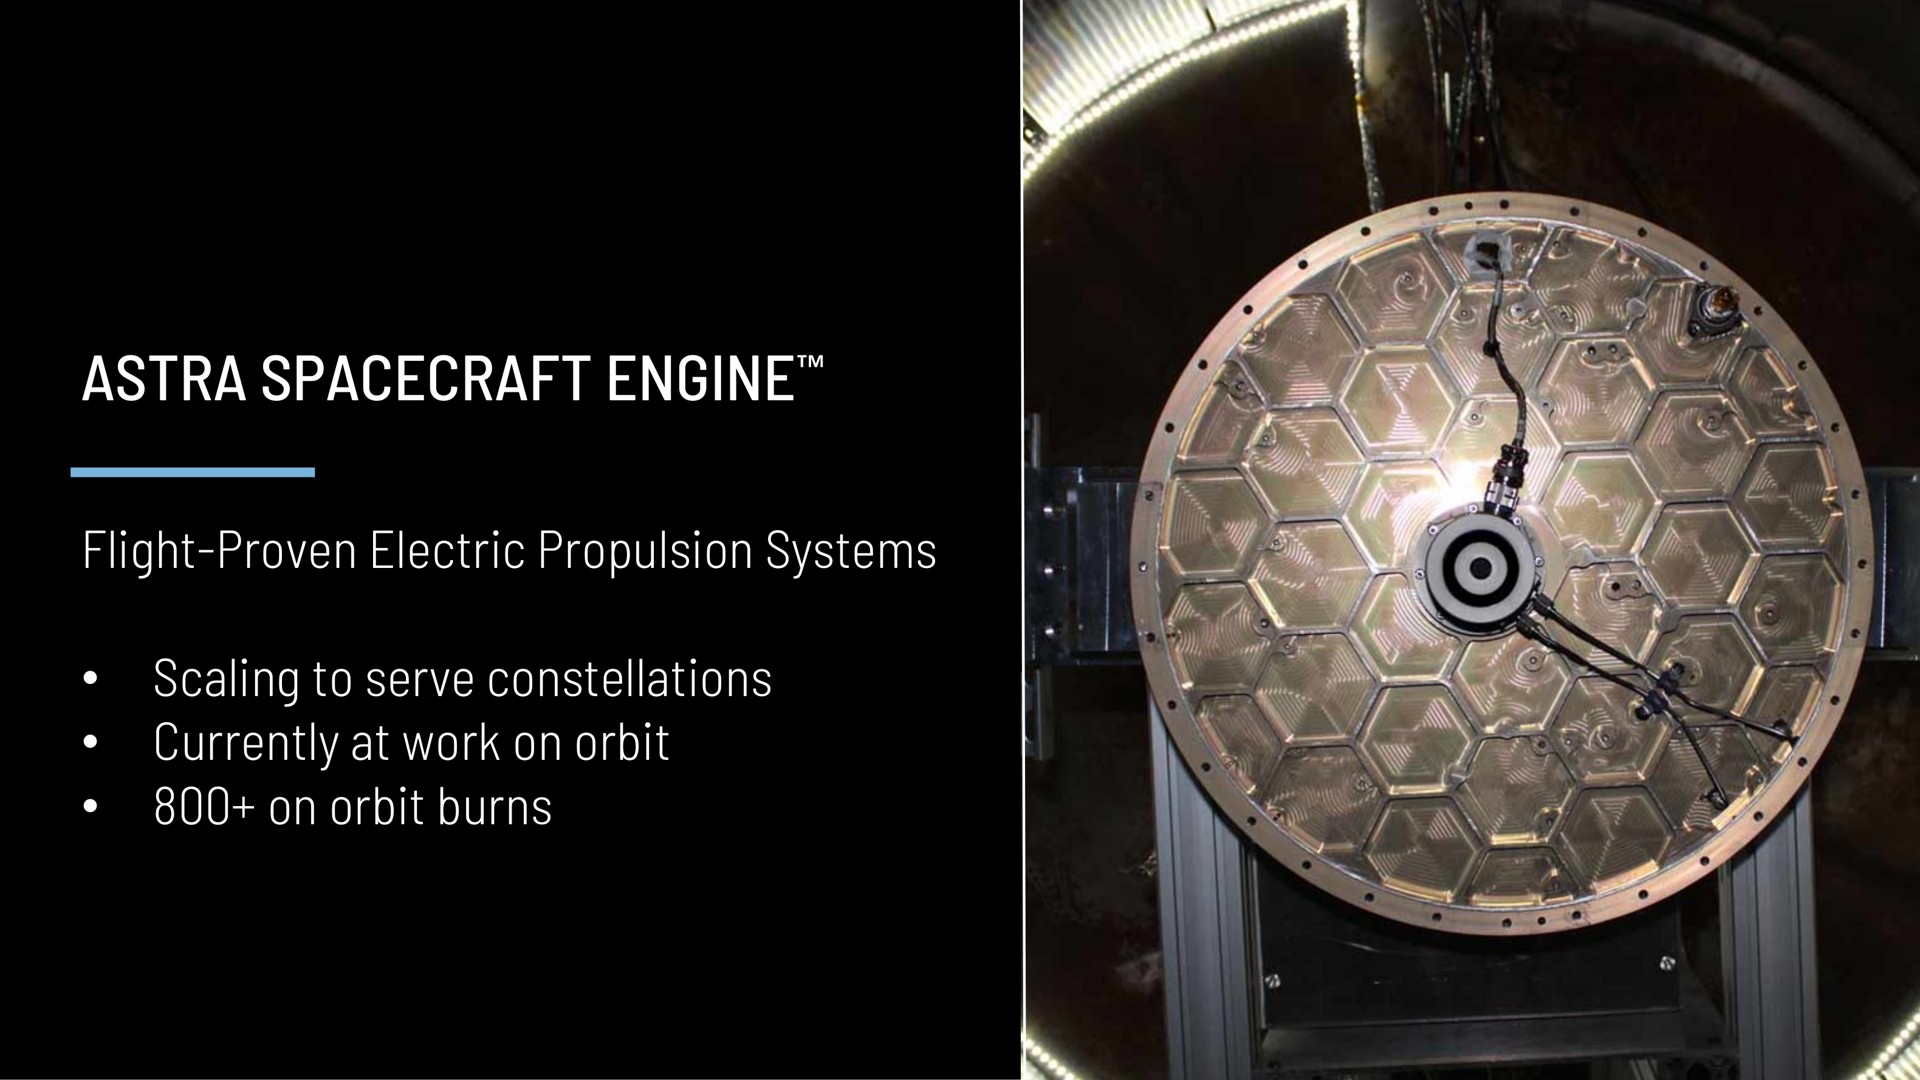 engine flight proven electric propulsion systems scaling to serve constellations currently at work on orbit on orbit burns | Astra